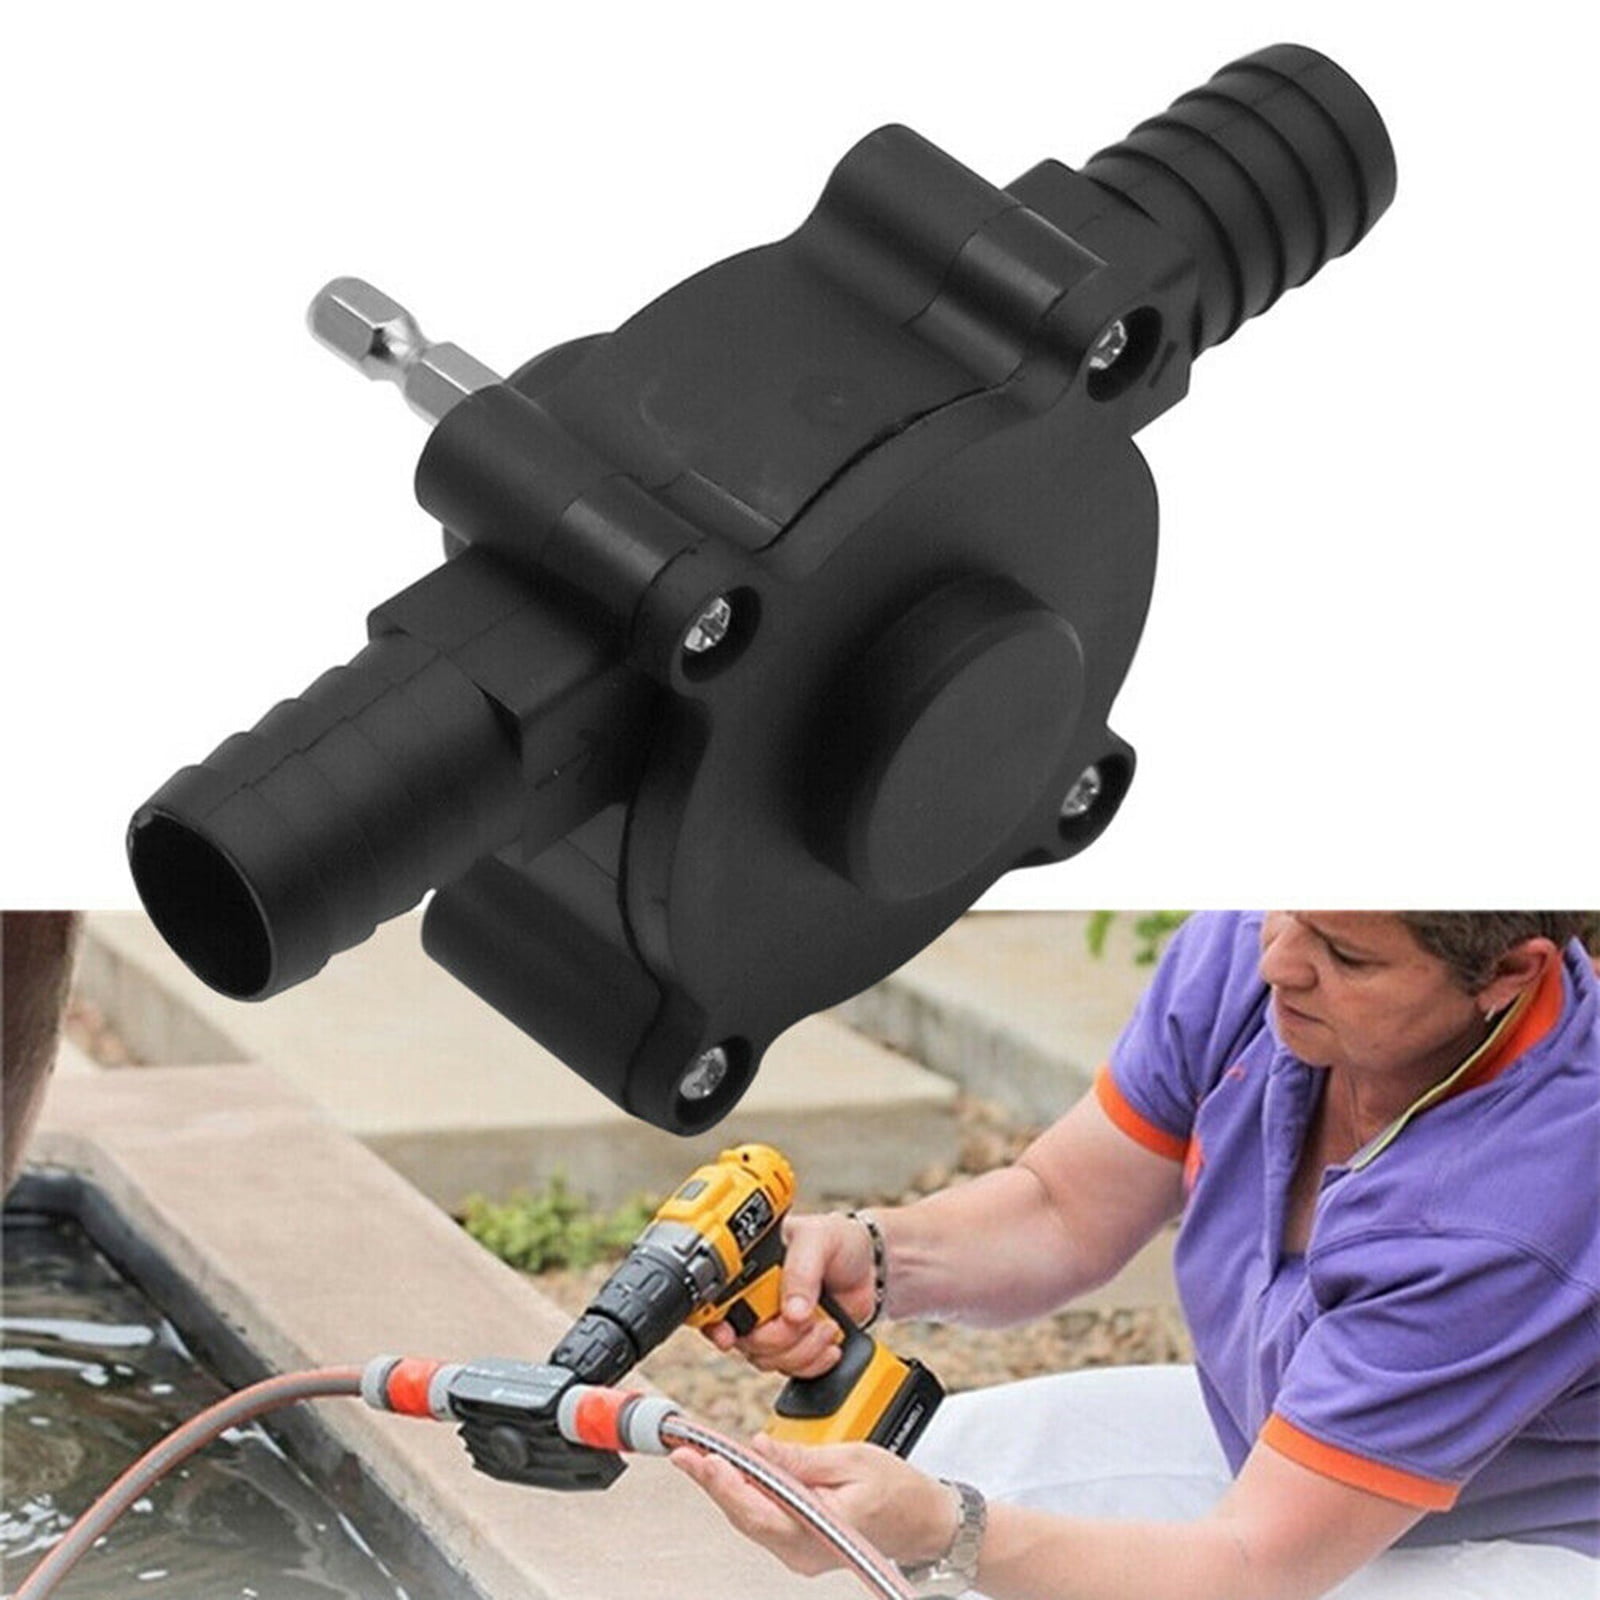 Electric Drill Accessories.Portable Dc Pumps Etc. Self-Priming Centrifugal Pumps，for Pumping Water Household Small Water Pump Swimming Pool Electric Drill Drive